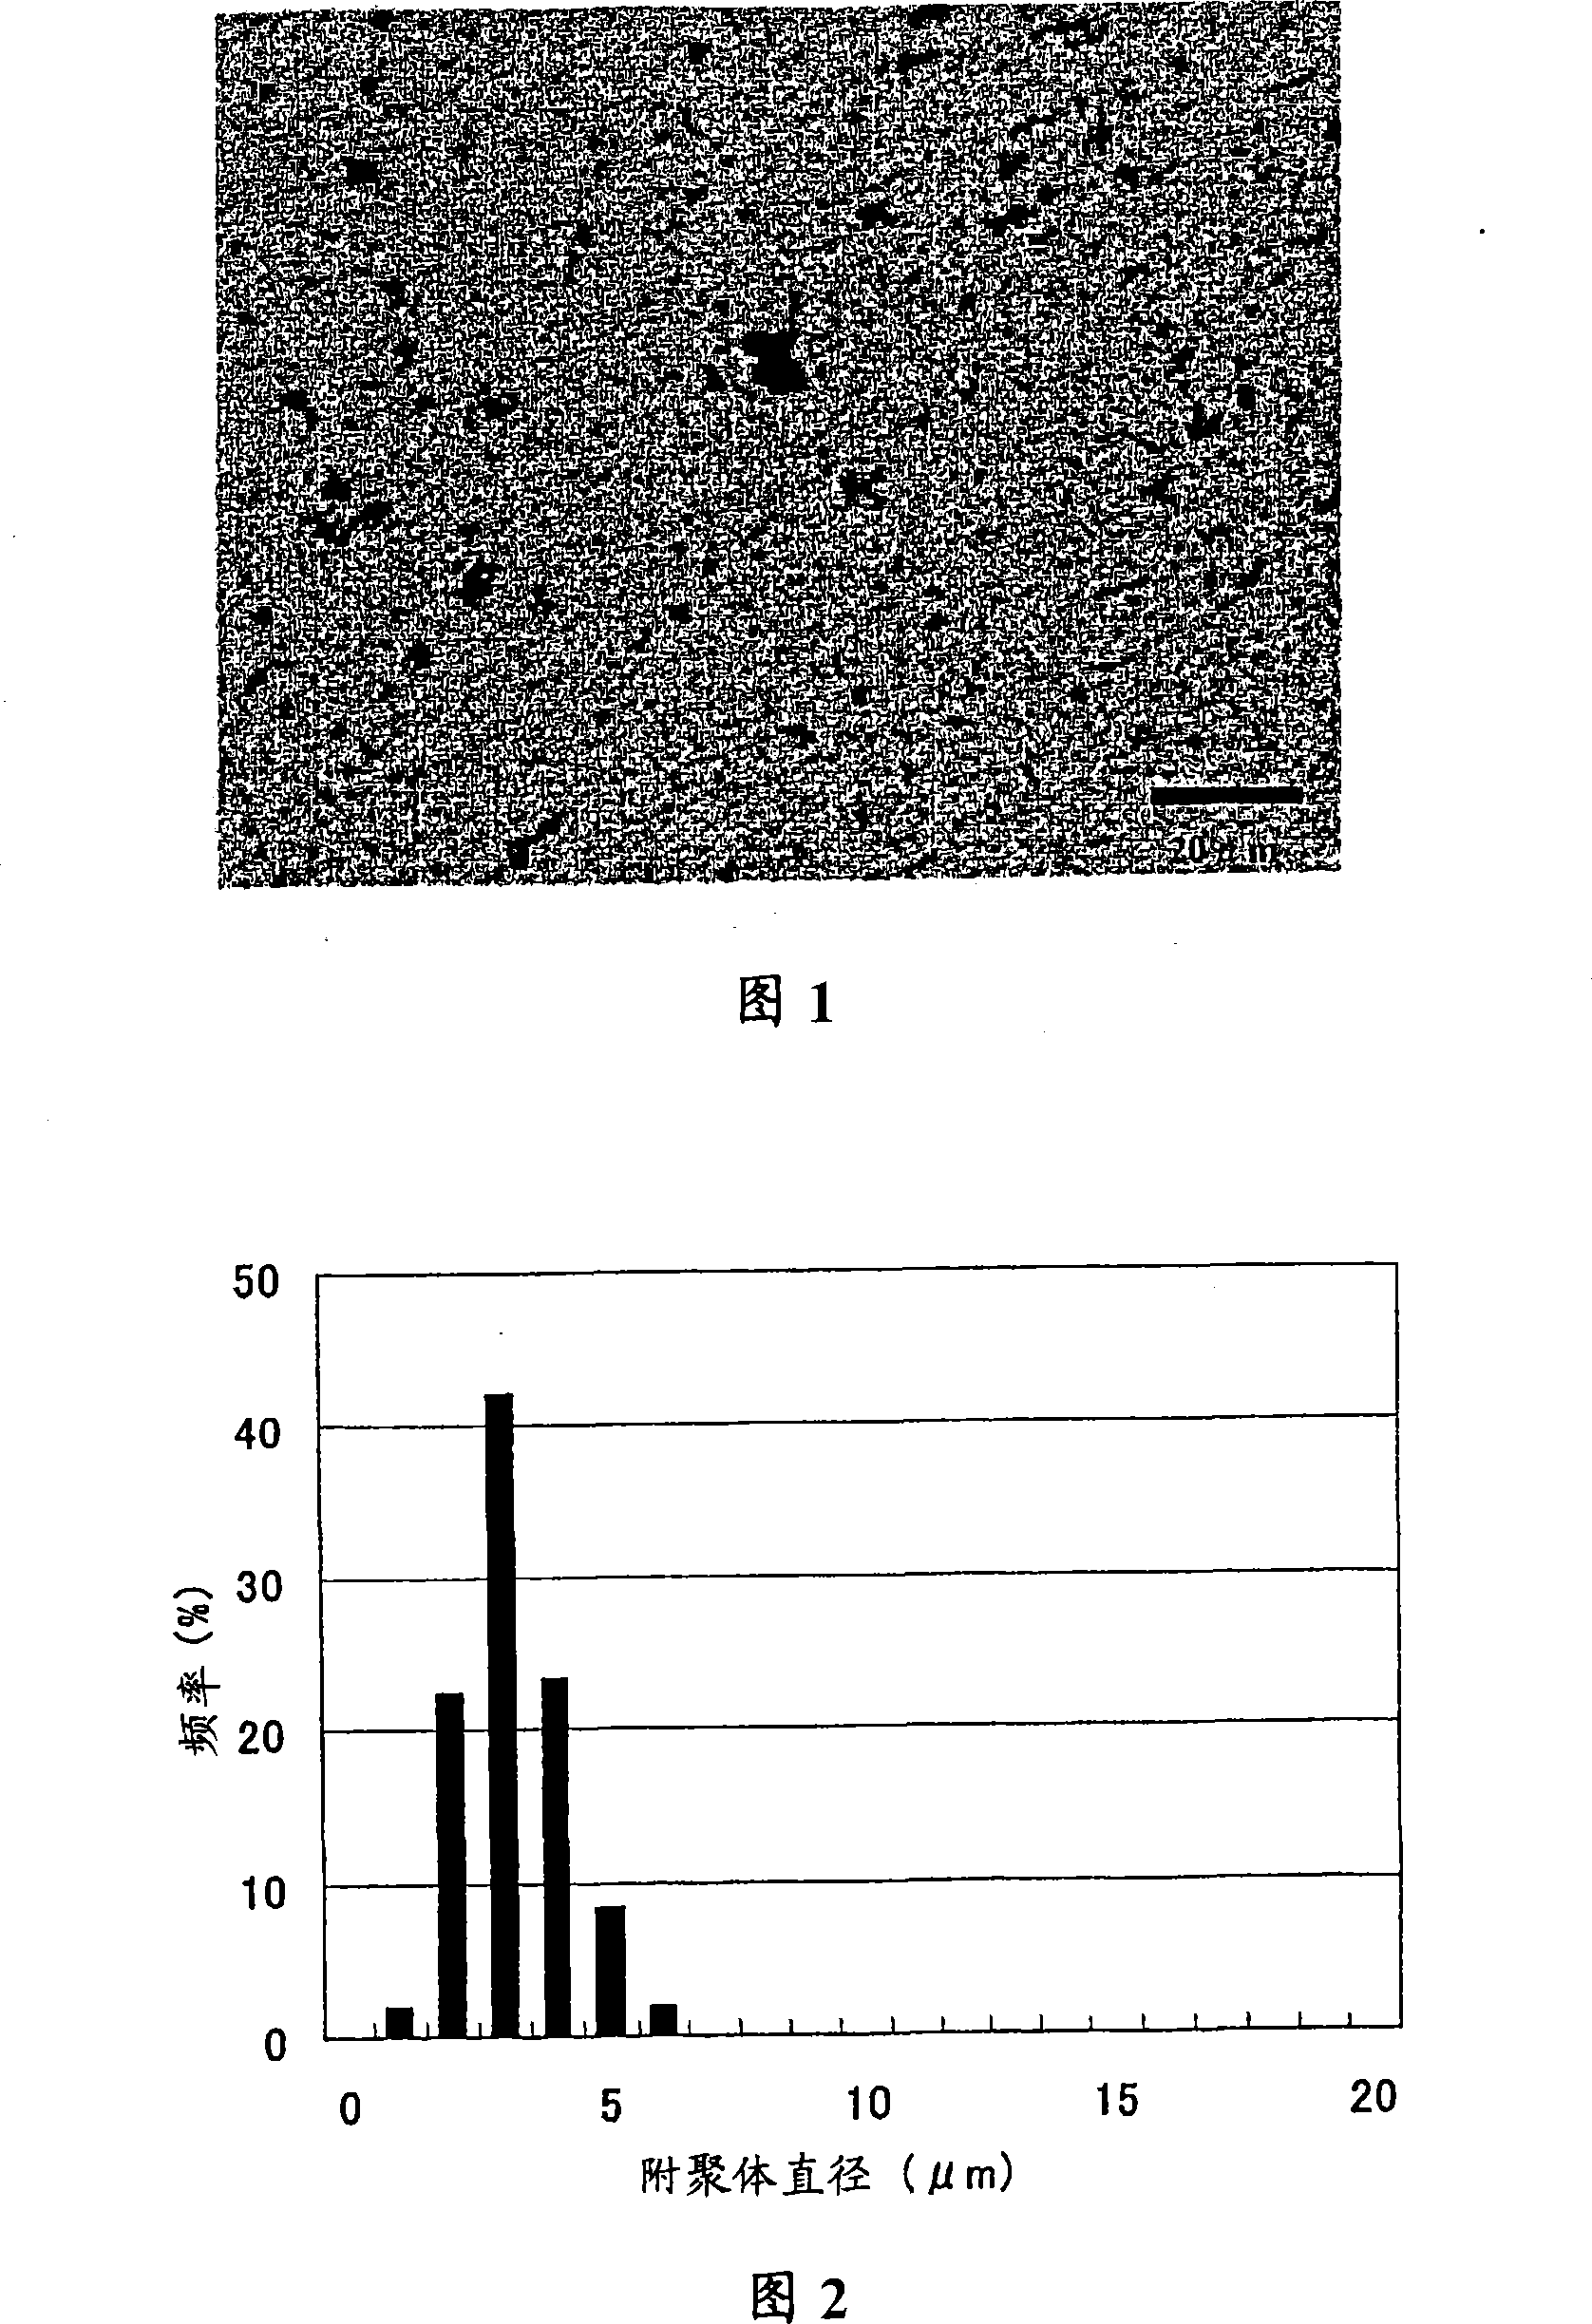 Electroconductive resin composition, production method and use thereof